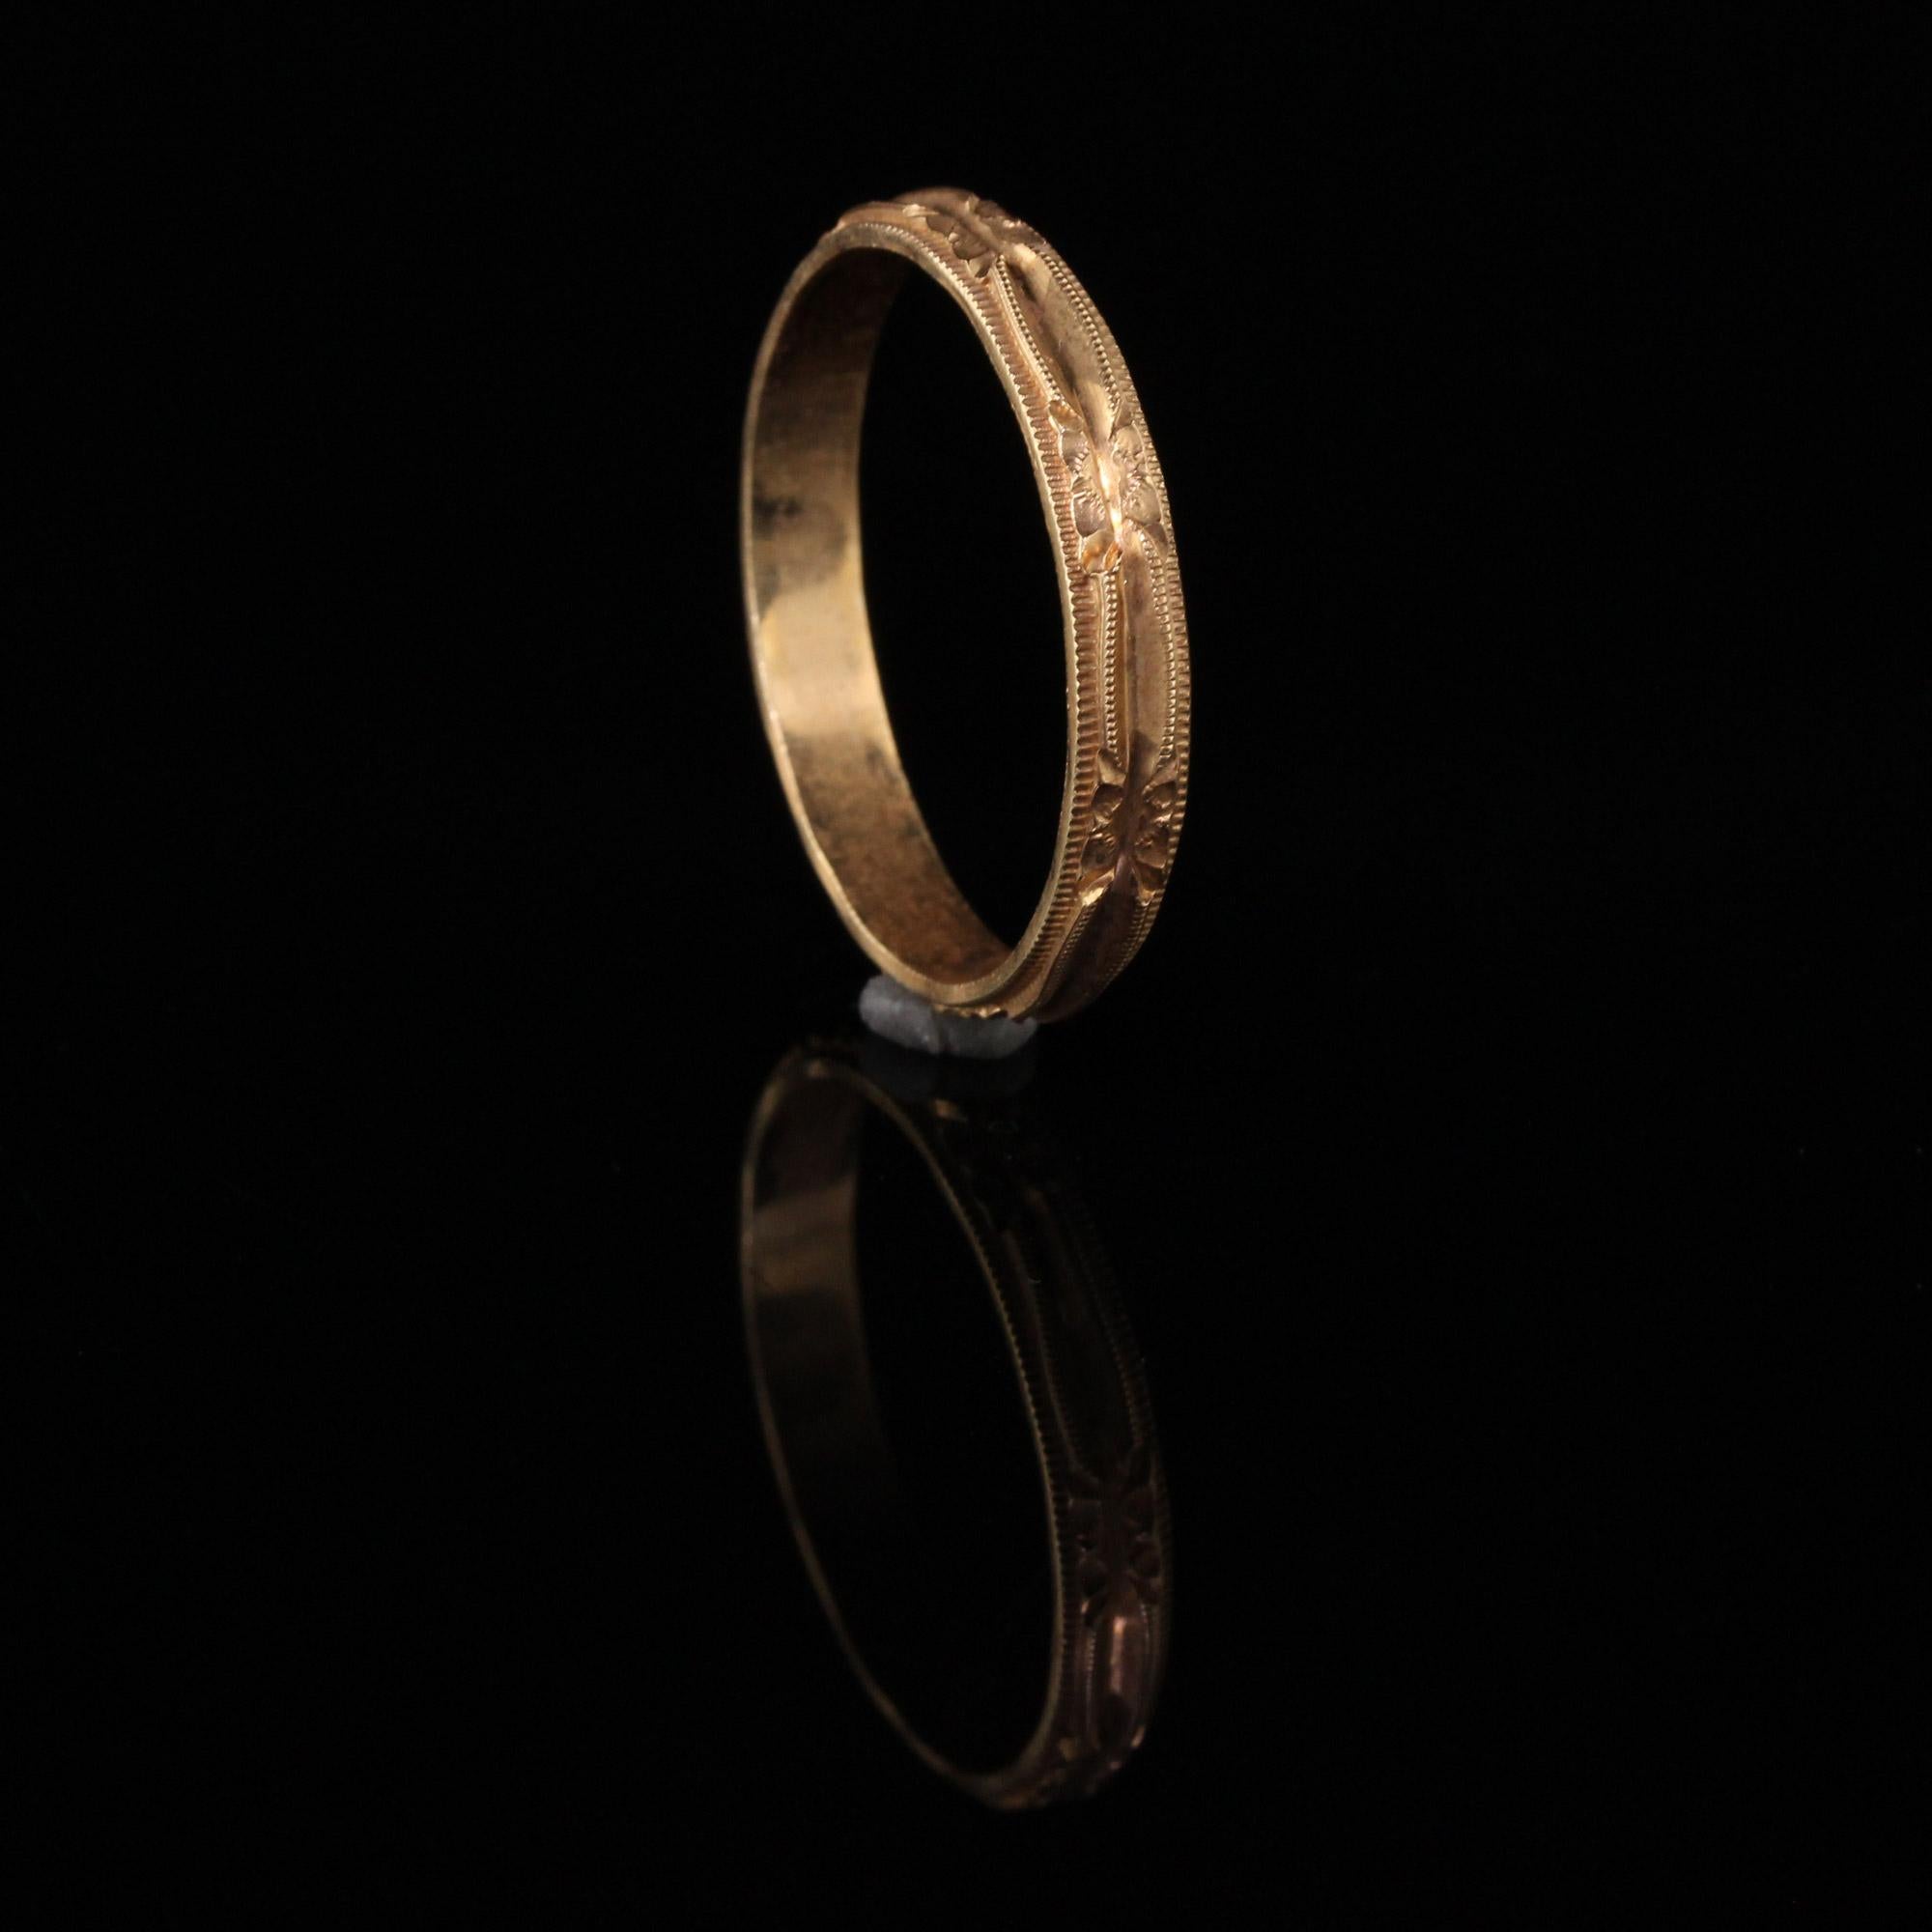 Antique Art Deco 14 Karat Yellow Gold Engraved Wedding Band In Excellent Condition For Sale In Great Neck, NY